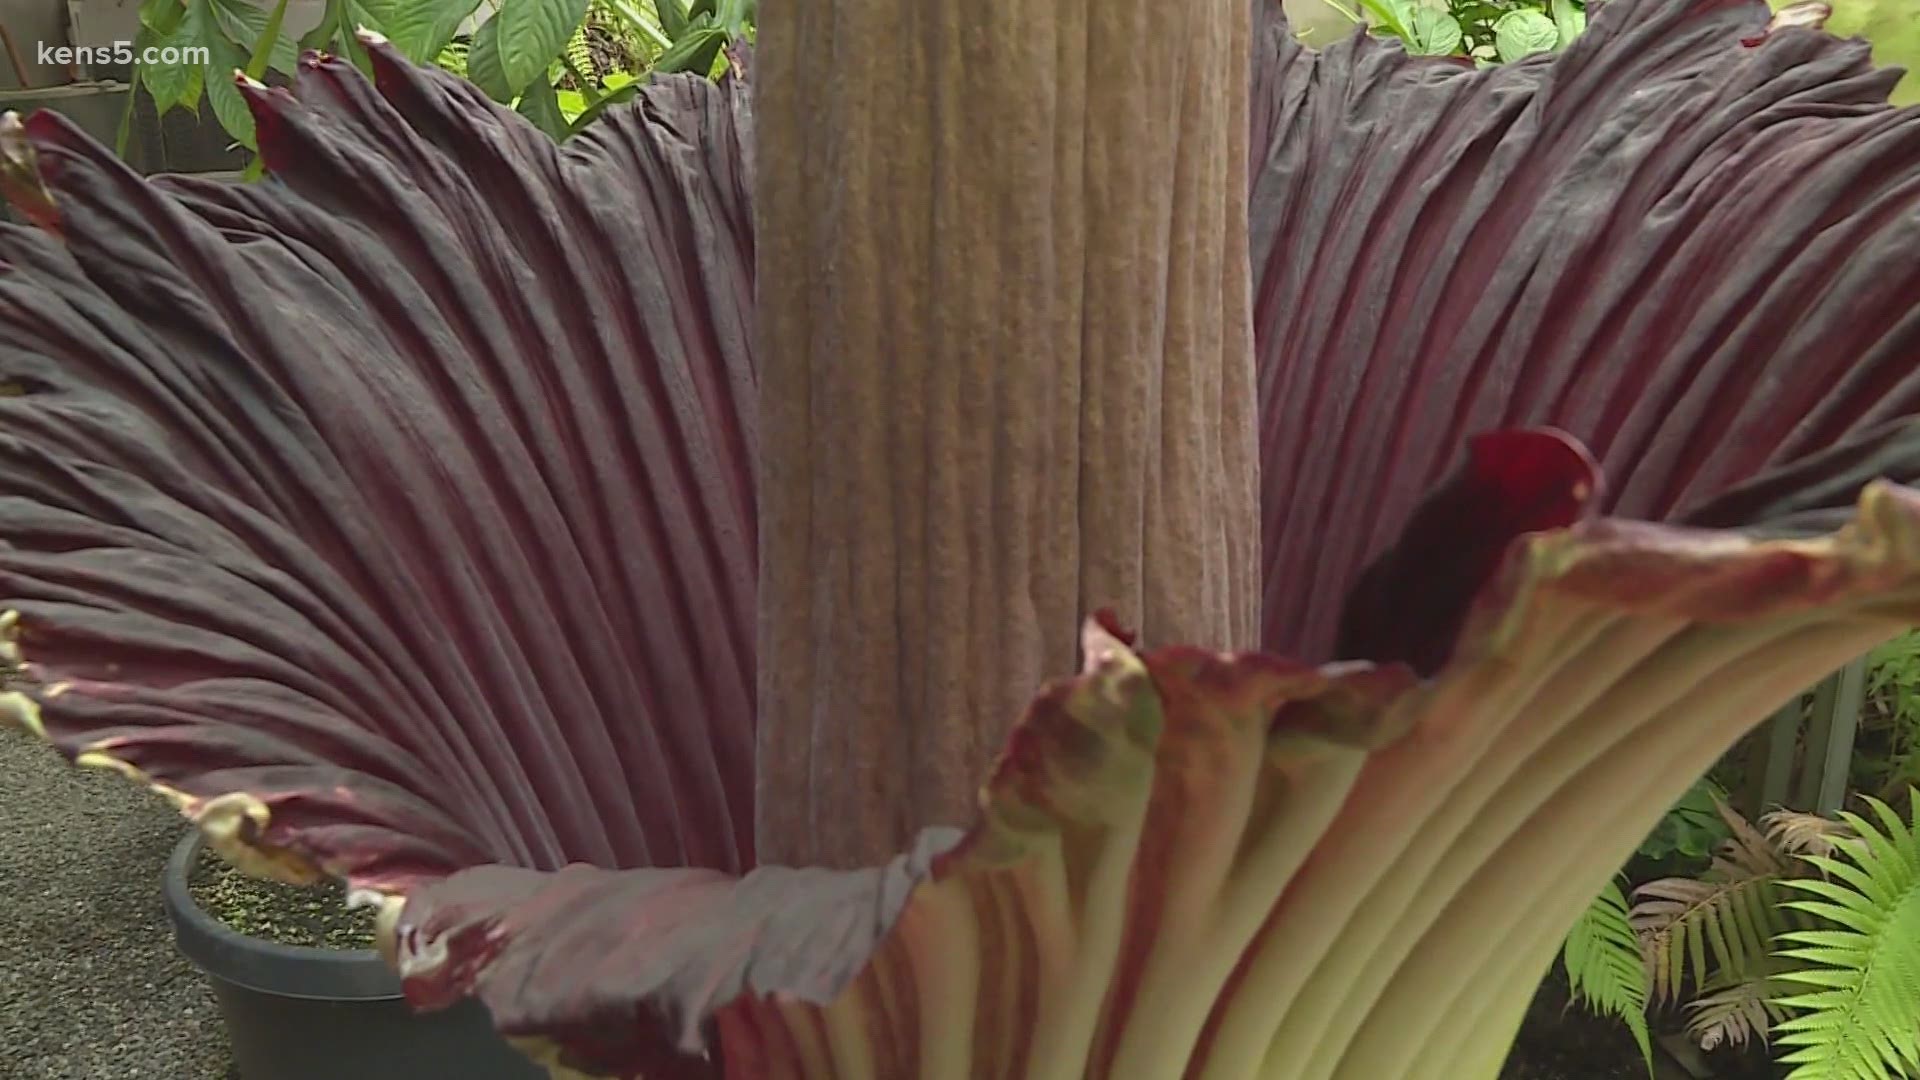 An endangered "rotting flesh" or "corpse flower" is blooming in an Ohio park conservatory. People say it smells like death.